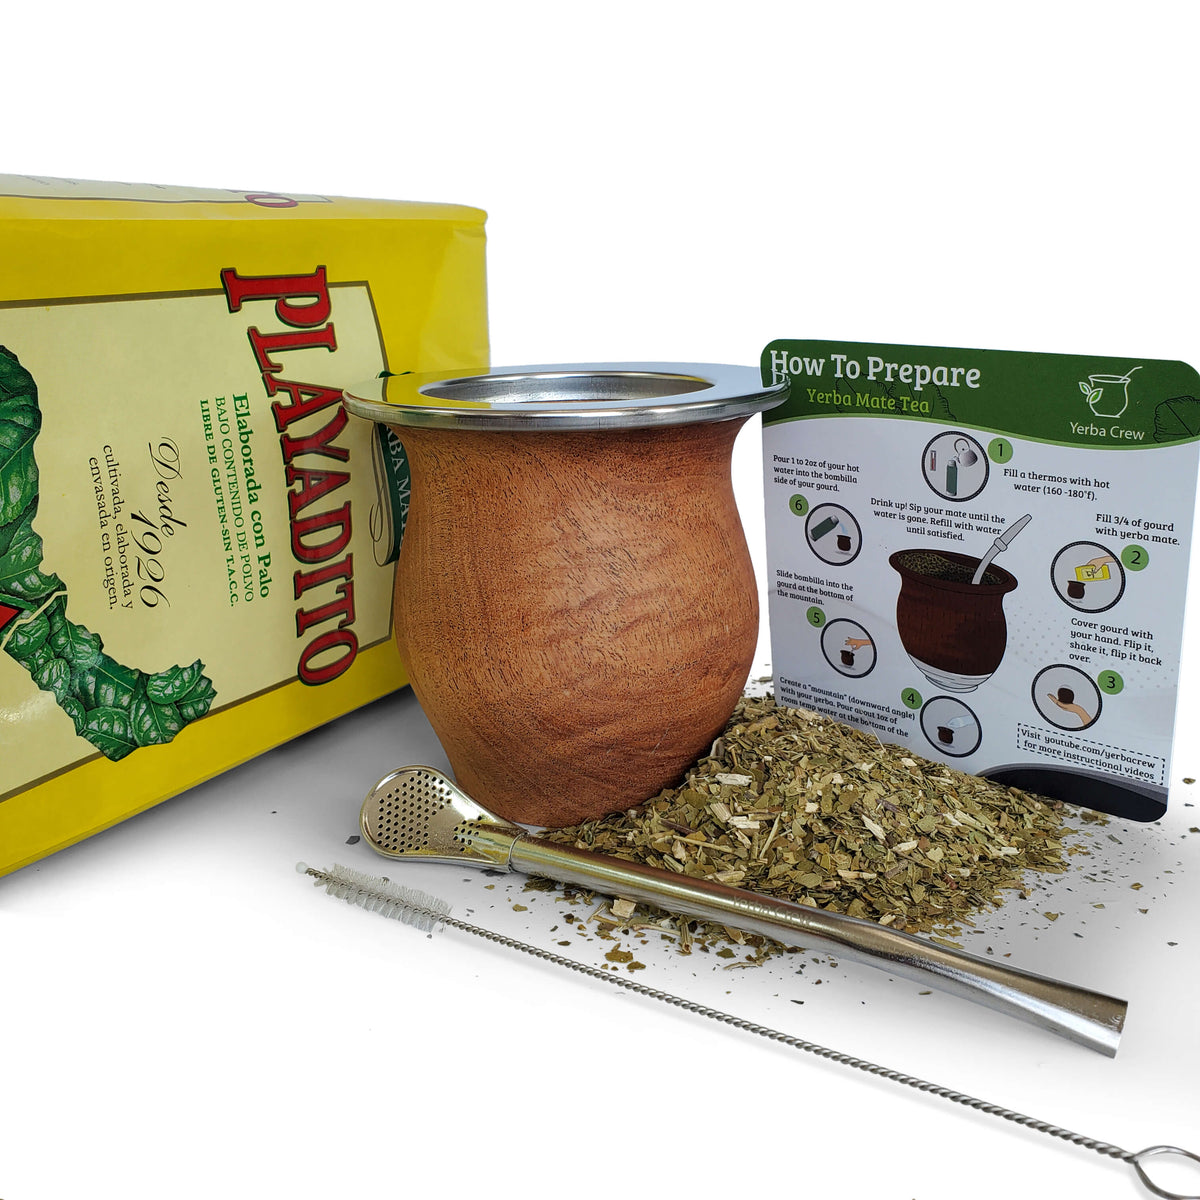 Playadito 1kg yerba mate loose leaf tea with Gauch mate cup